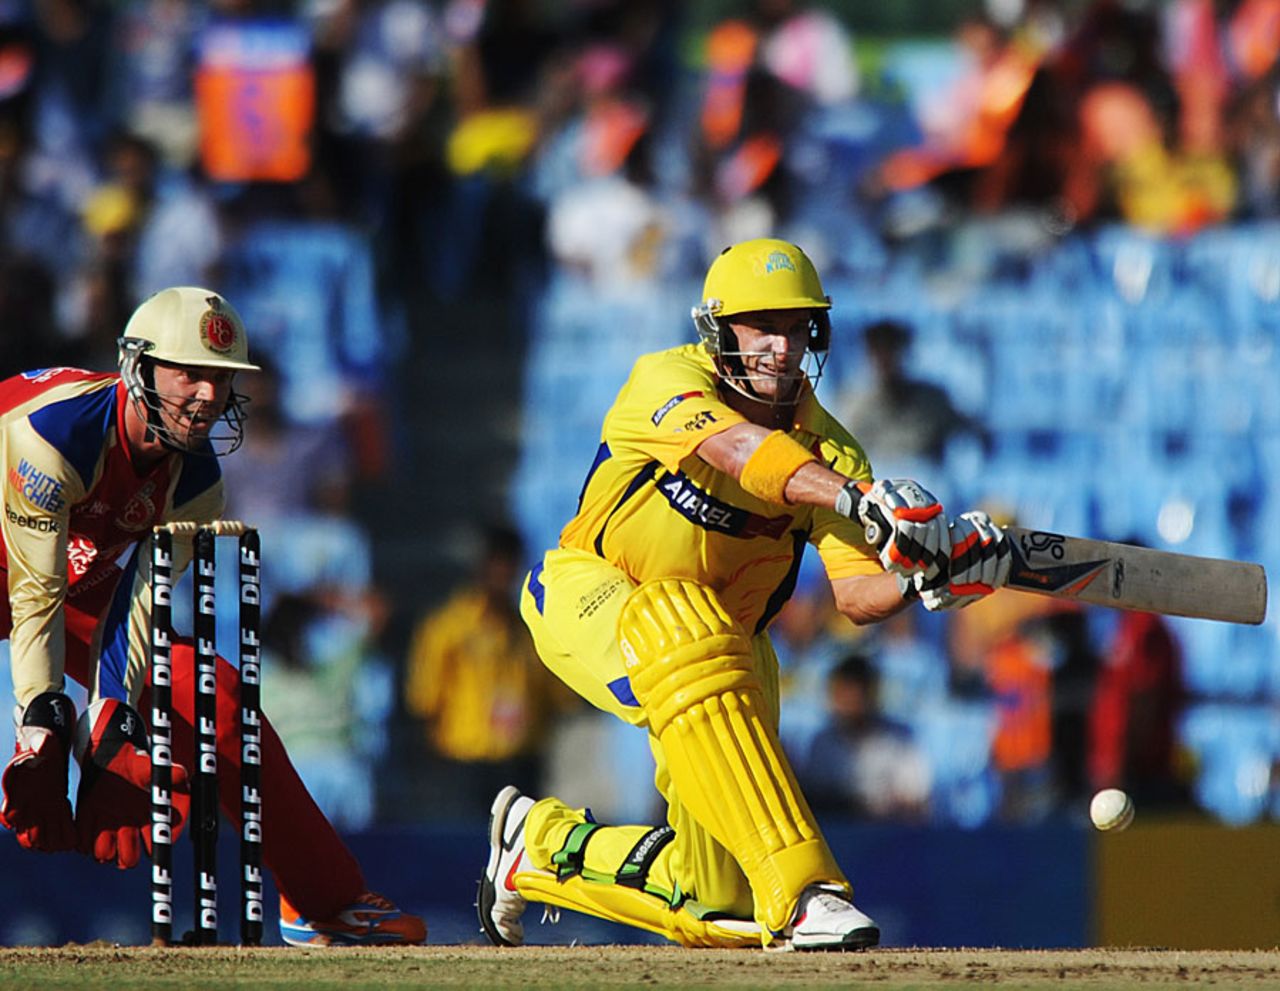 Michael Hussey finished with 83 off 56 balls, Chennai Super Kings v Royal Challengers Bangalore, Chennai, April 16, 2011